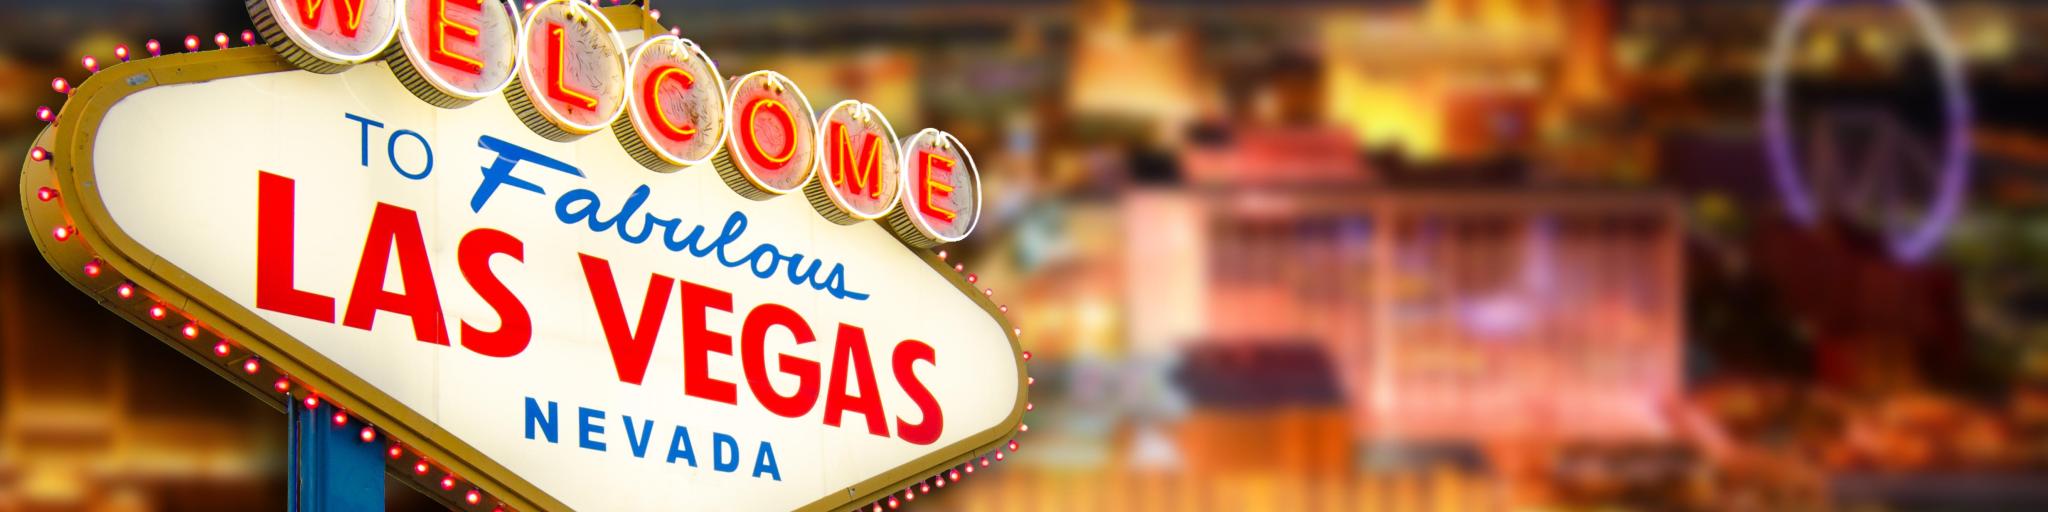 "Welcome to Las Vegas" sign with the view of the city in the background at night